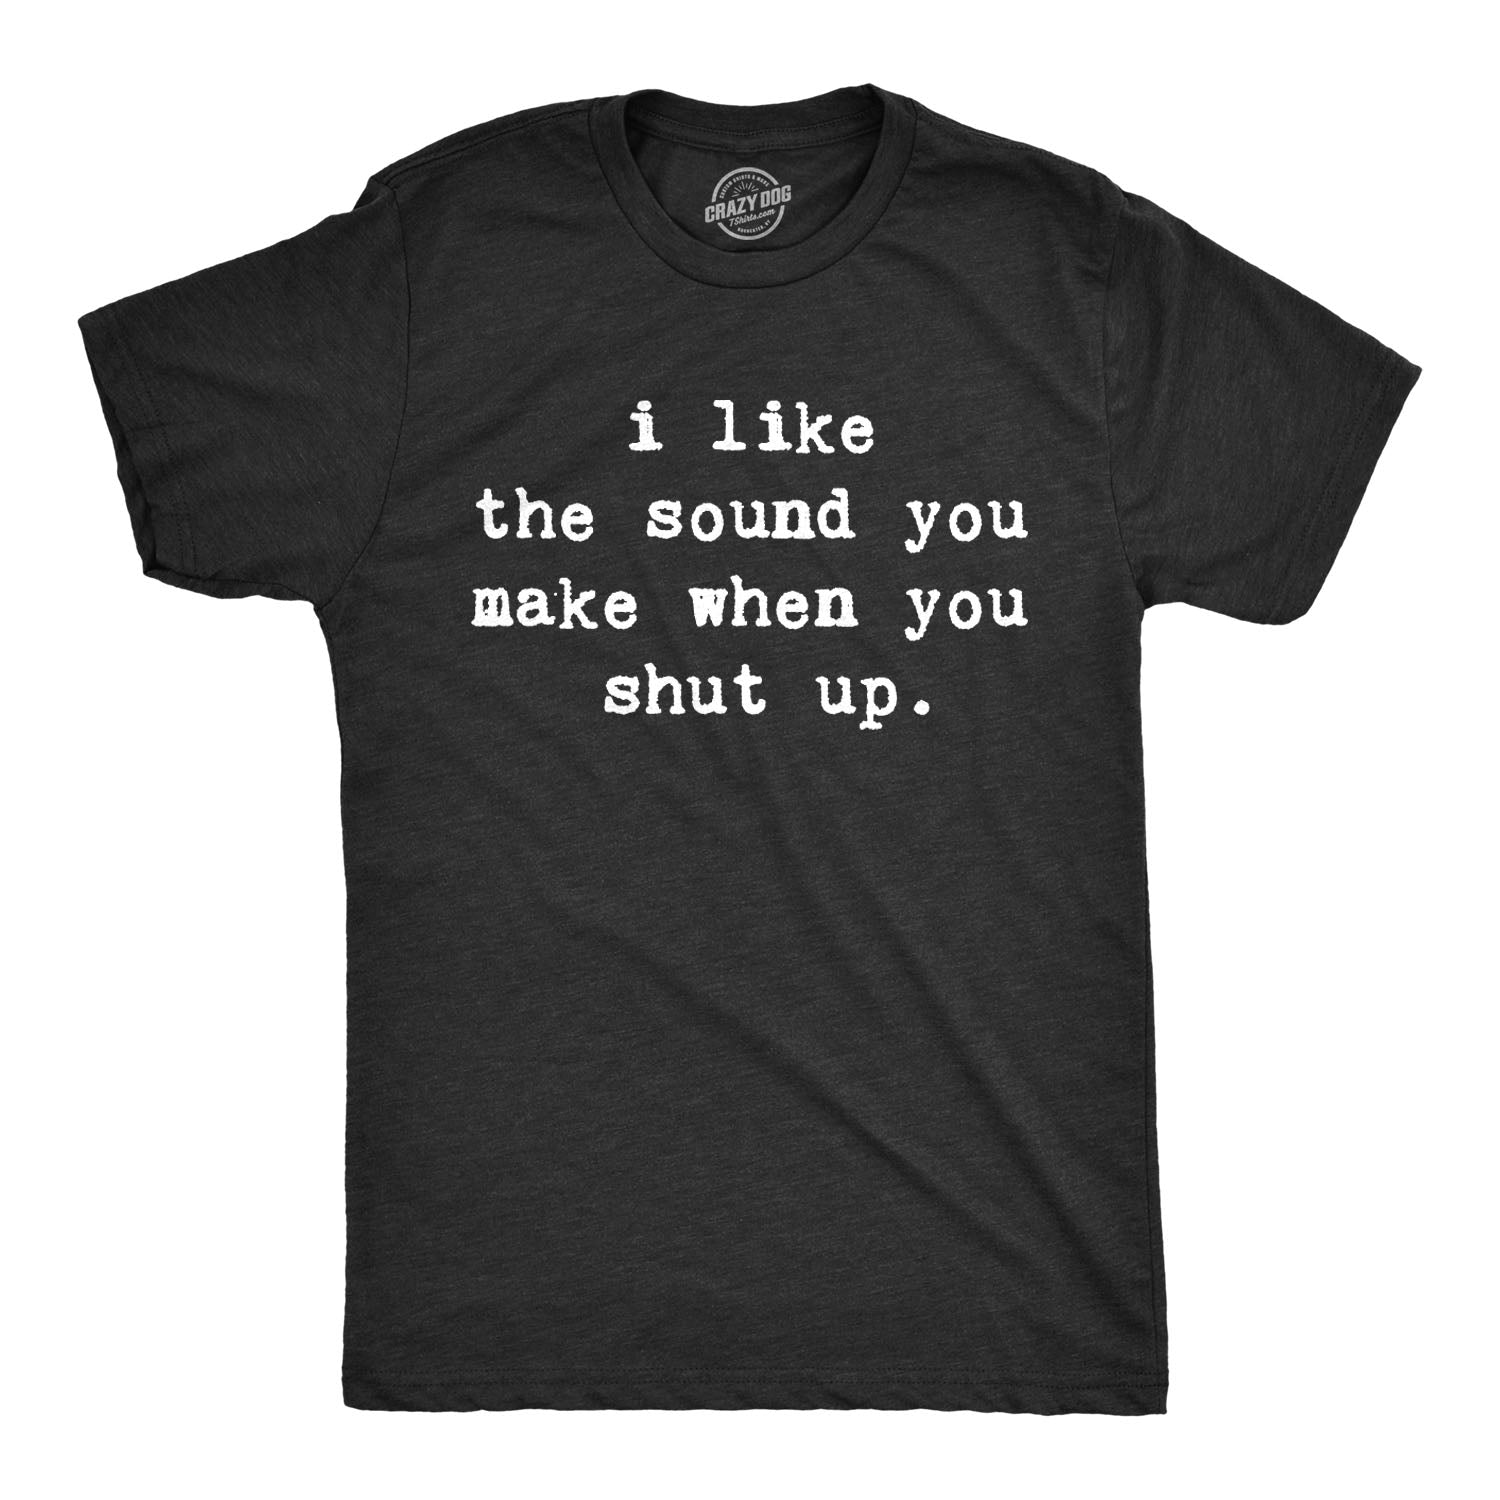 Funny Heather Black I Like The Sound You Make When You Shut Up Mens T Shirt Nerdy Sarcastic Tee